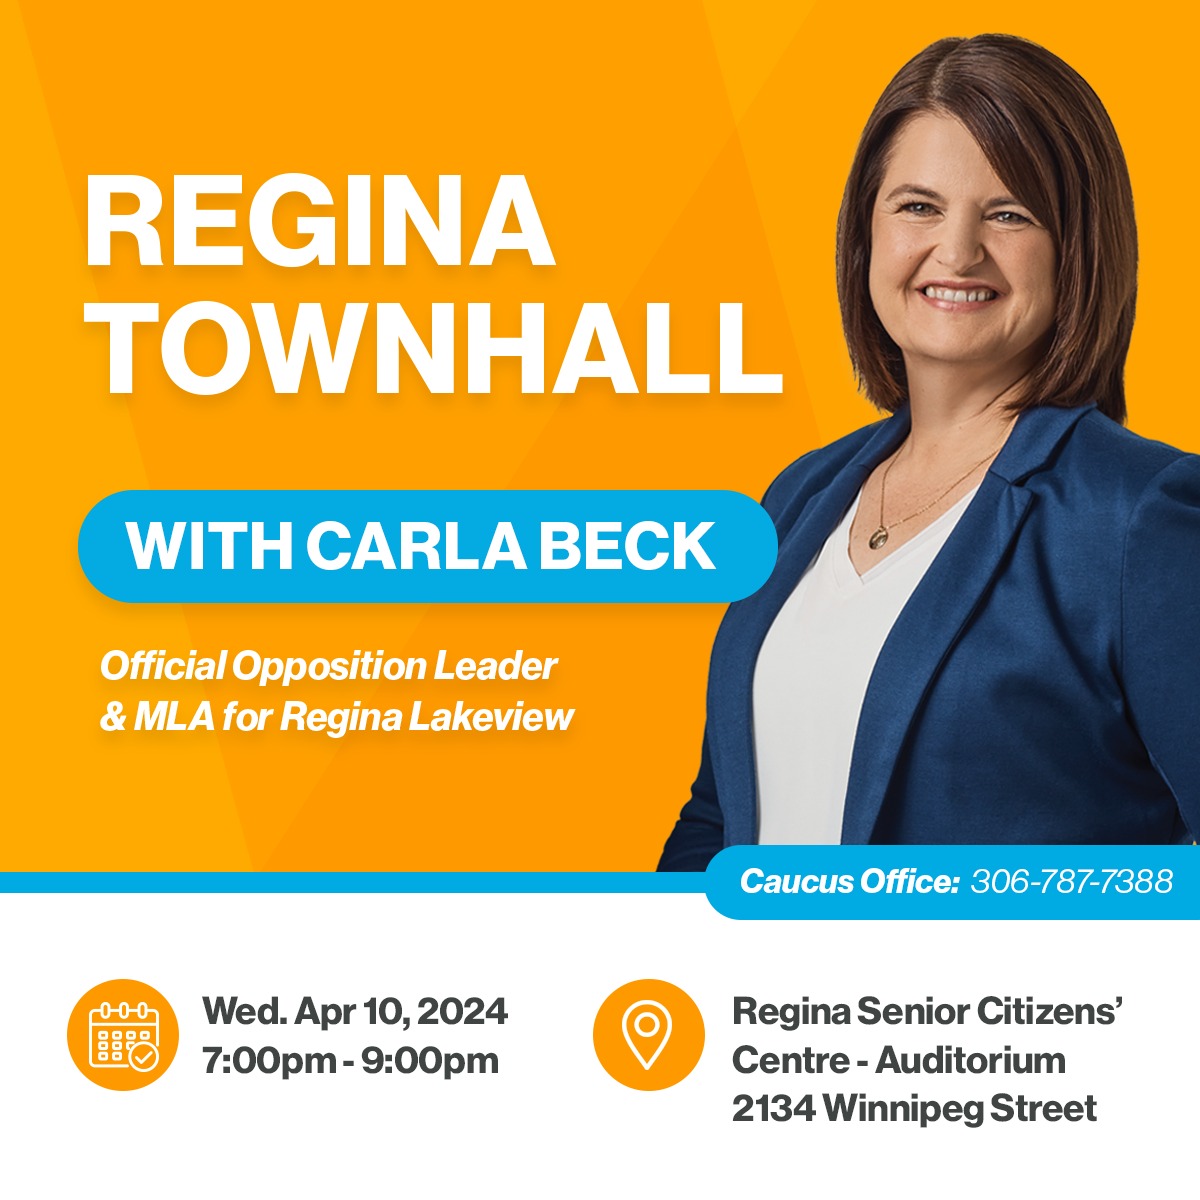 Hey Regina, we want to hear from you! Join us tomorrow for Carla's townhall and let's build made-in-Saskatchewan solutions to the issues that matter most. #skpoli #yqr